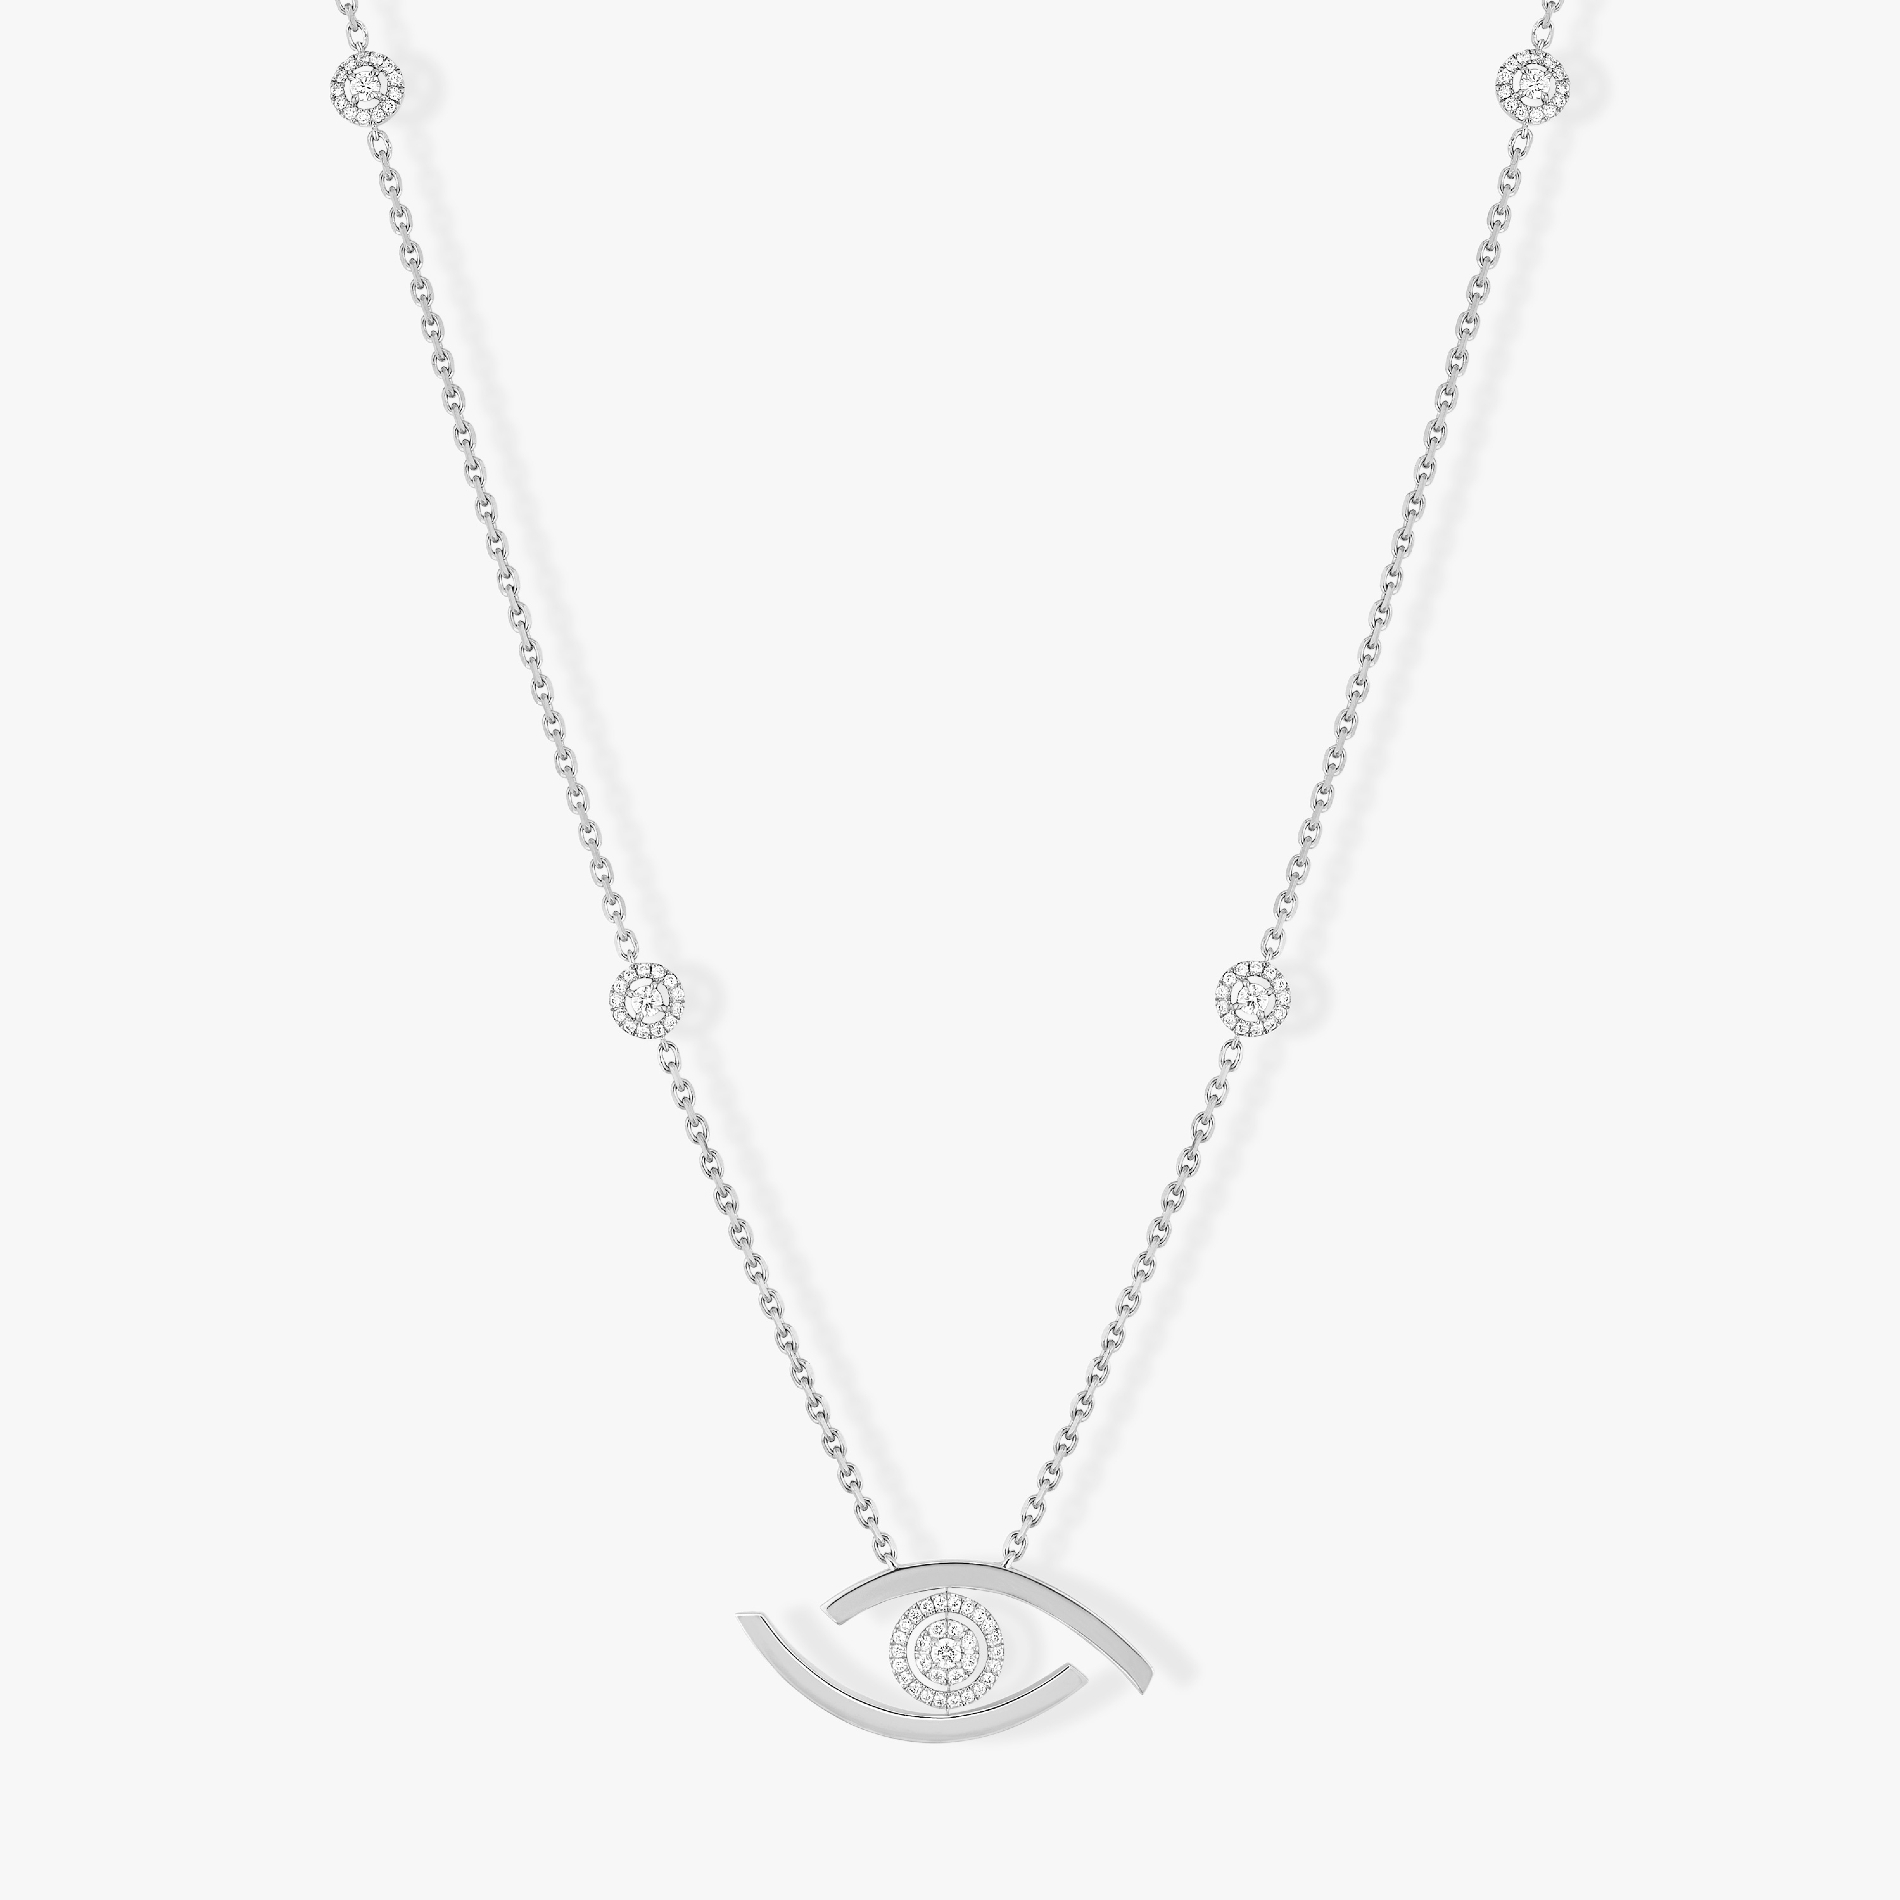 Lucky Eye long necklace White Gold For Her Diamond Necklace 11569-WG